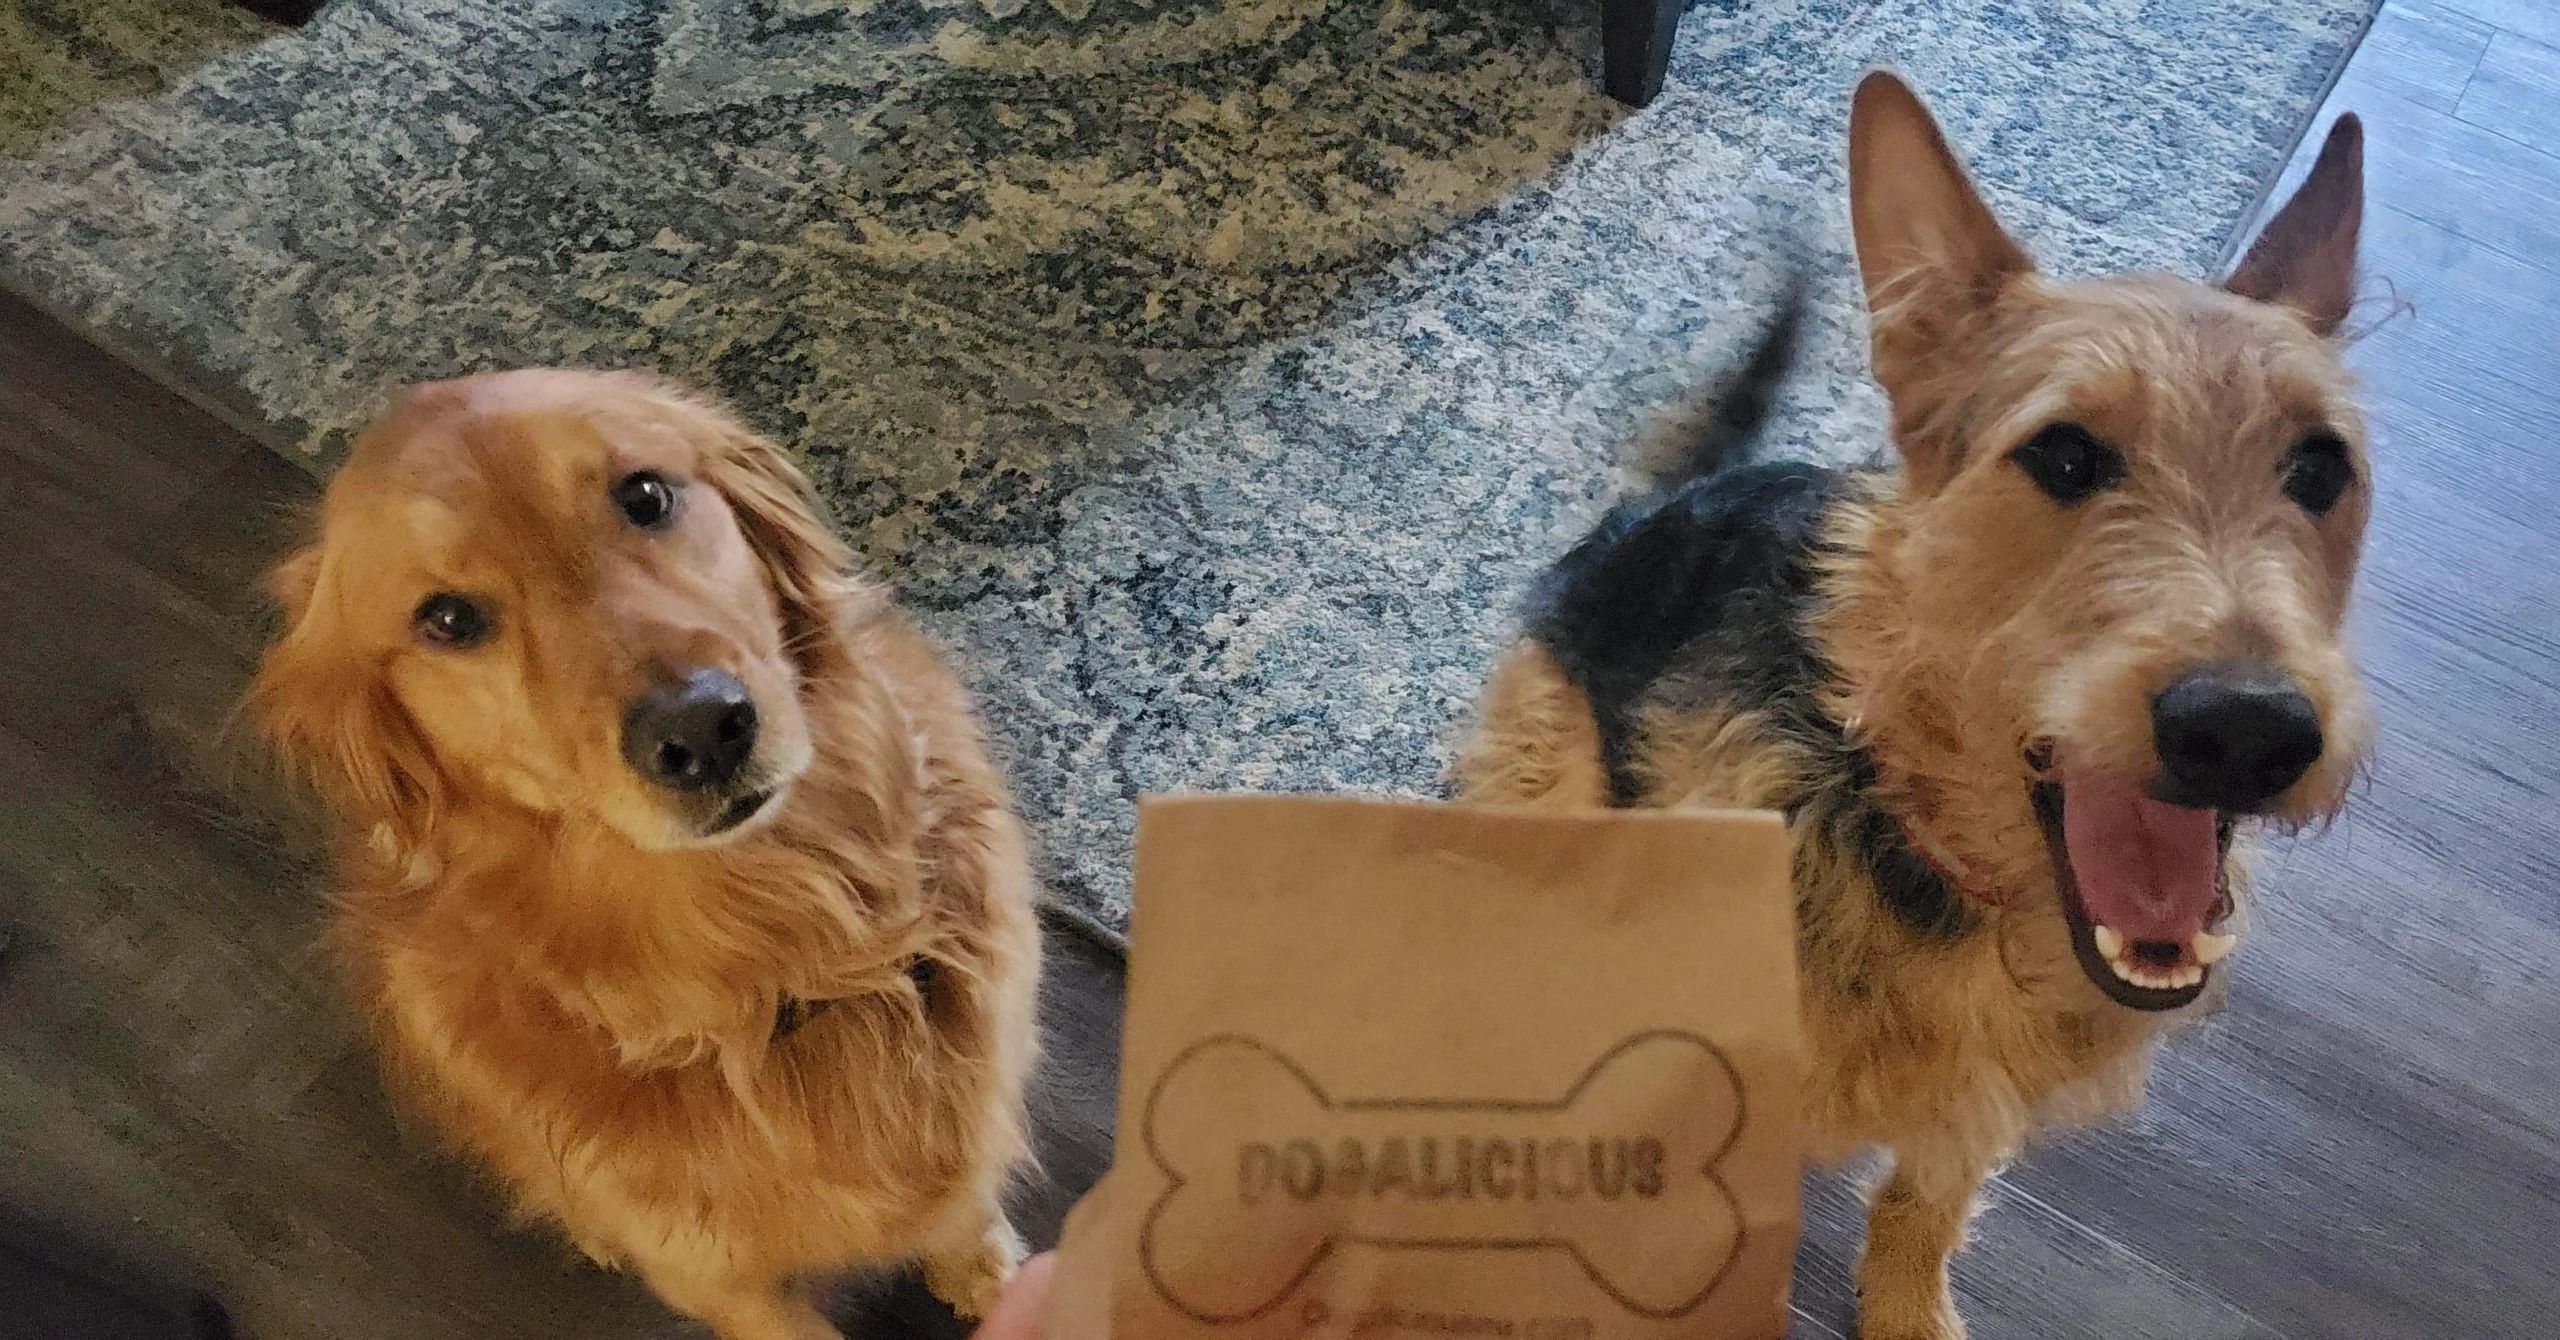 Fur babies excited for their farmers market find of dog treats!